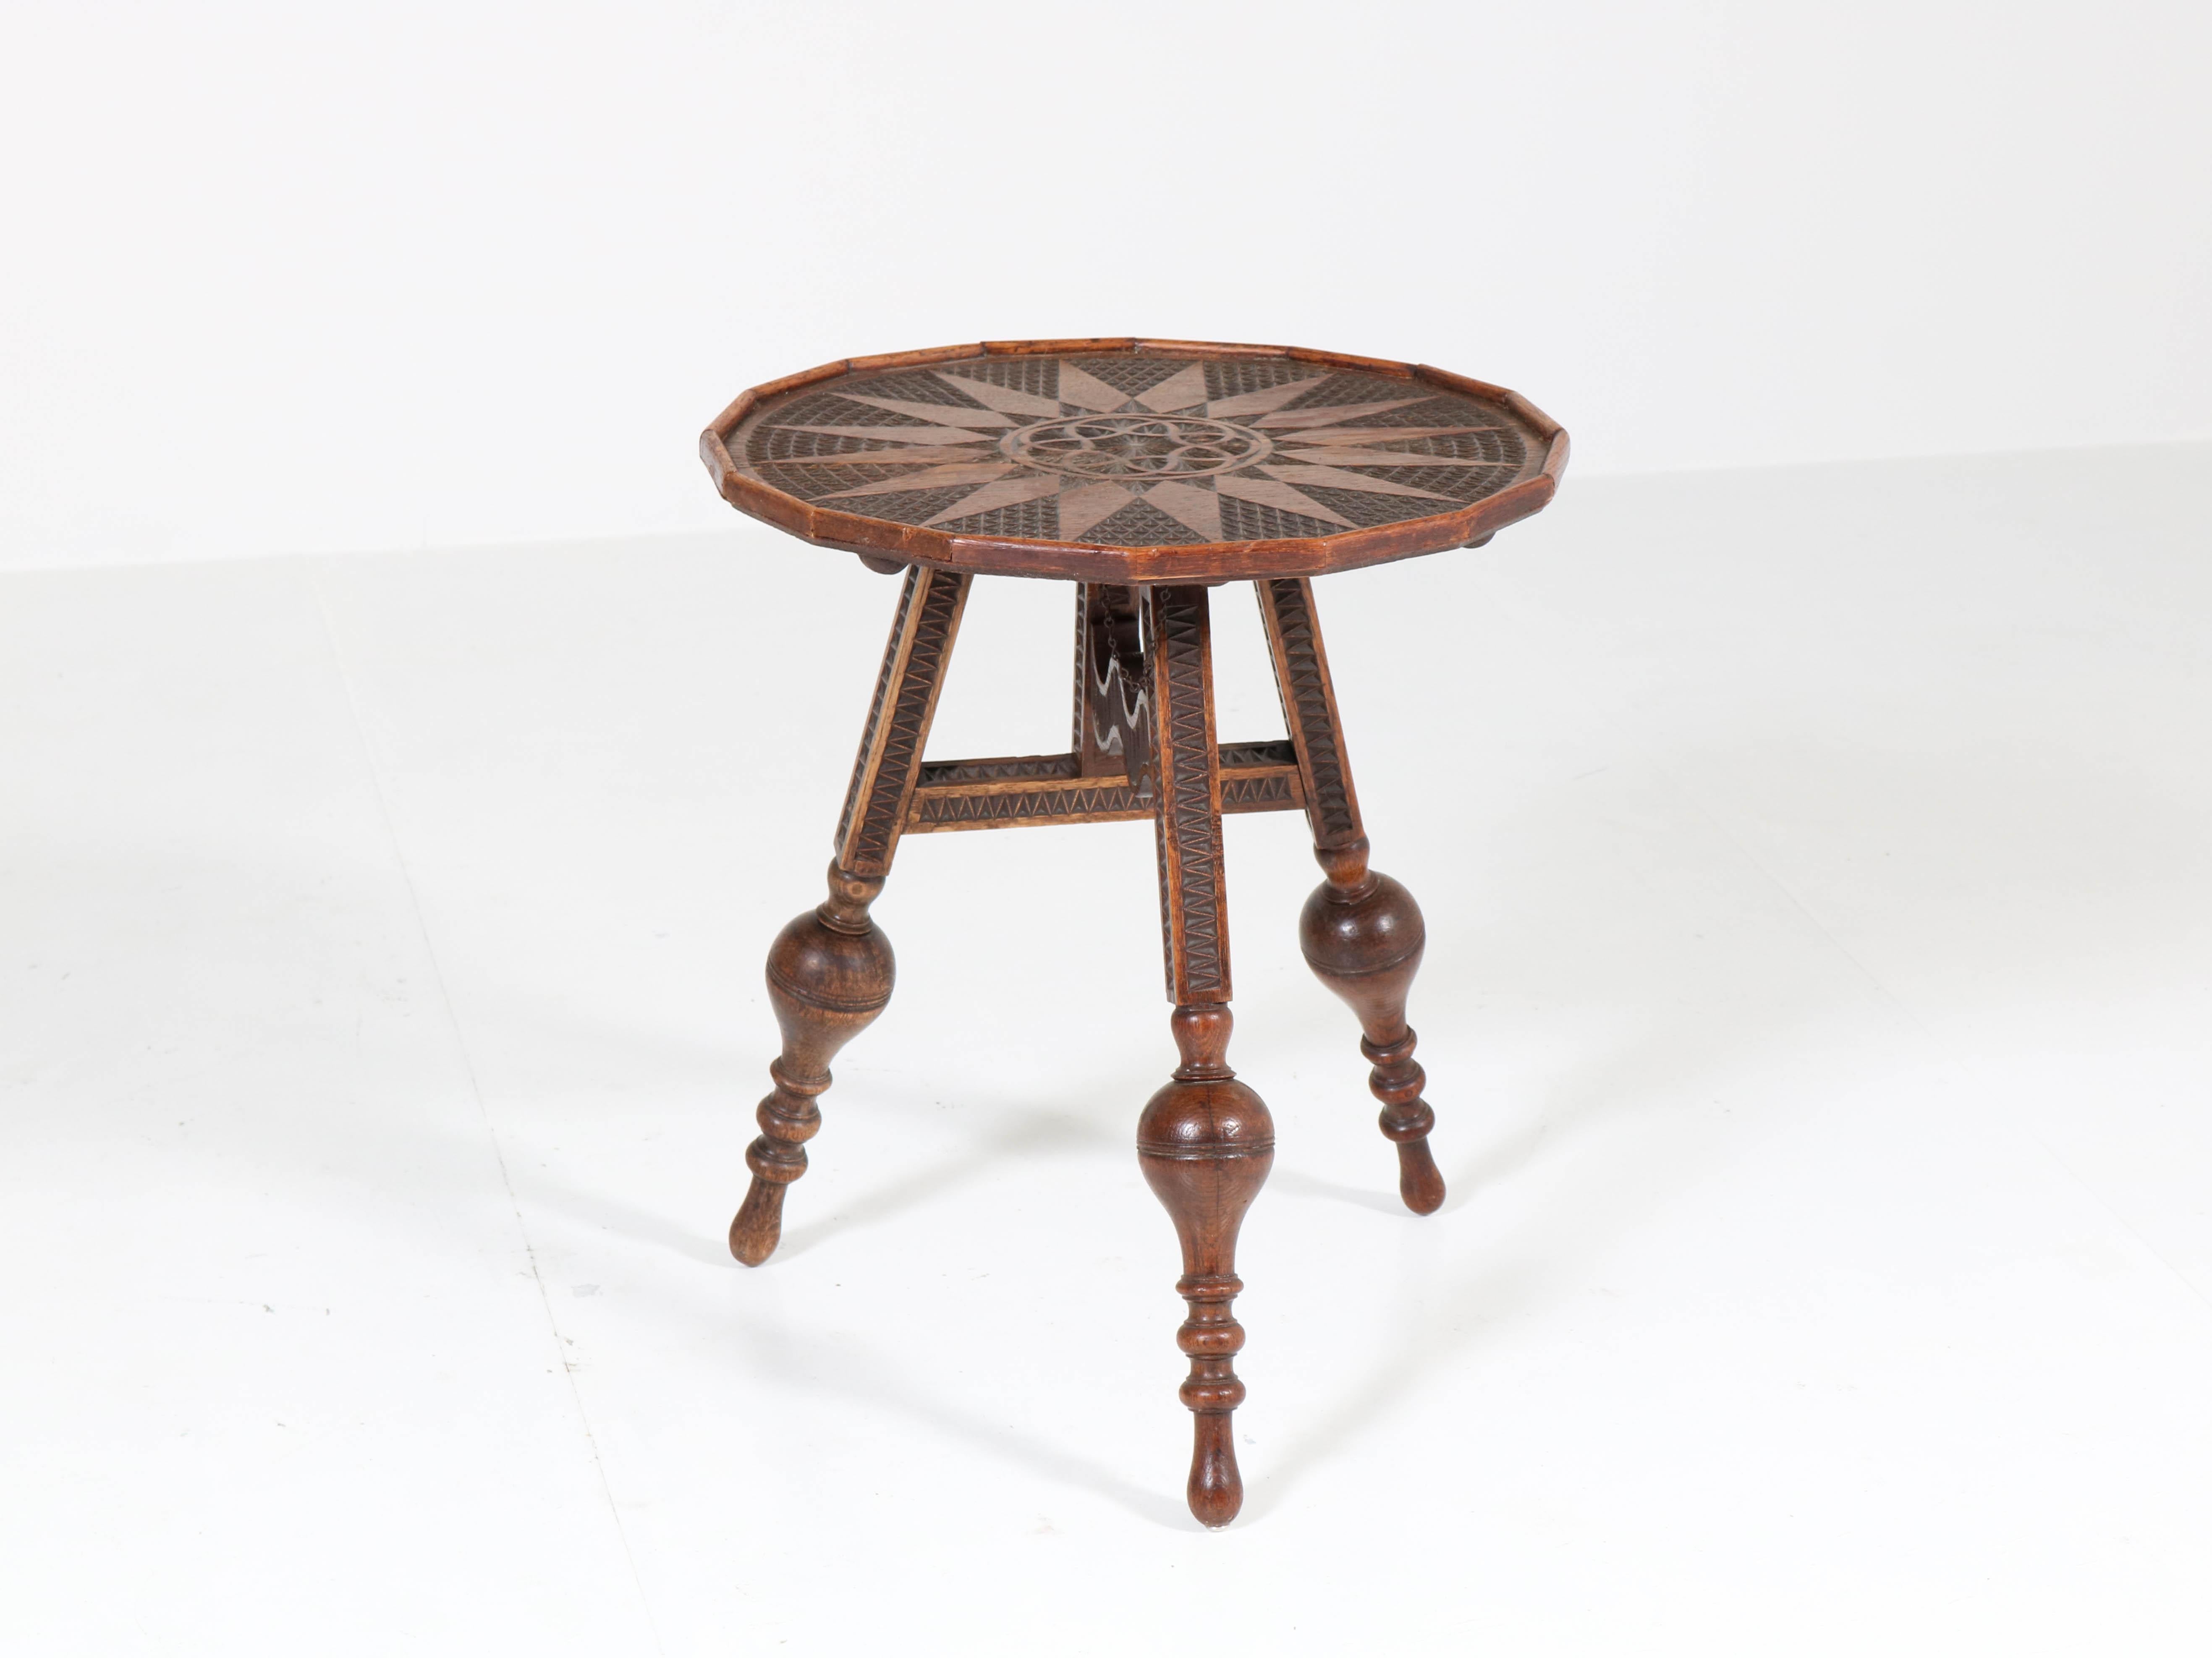 Offered by Amsterdam Modernism:
Wonderful and rare Renaissance Revival tilt-top flap a/d wand table, 1900s
Solid oak with nice carving.
Measurements when tilted: 85 cm or 33.46 in x 50 cm or 19.69 in.
In good original condition with minor wear